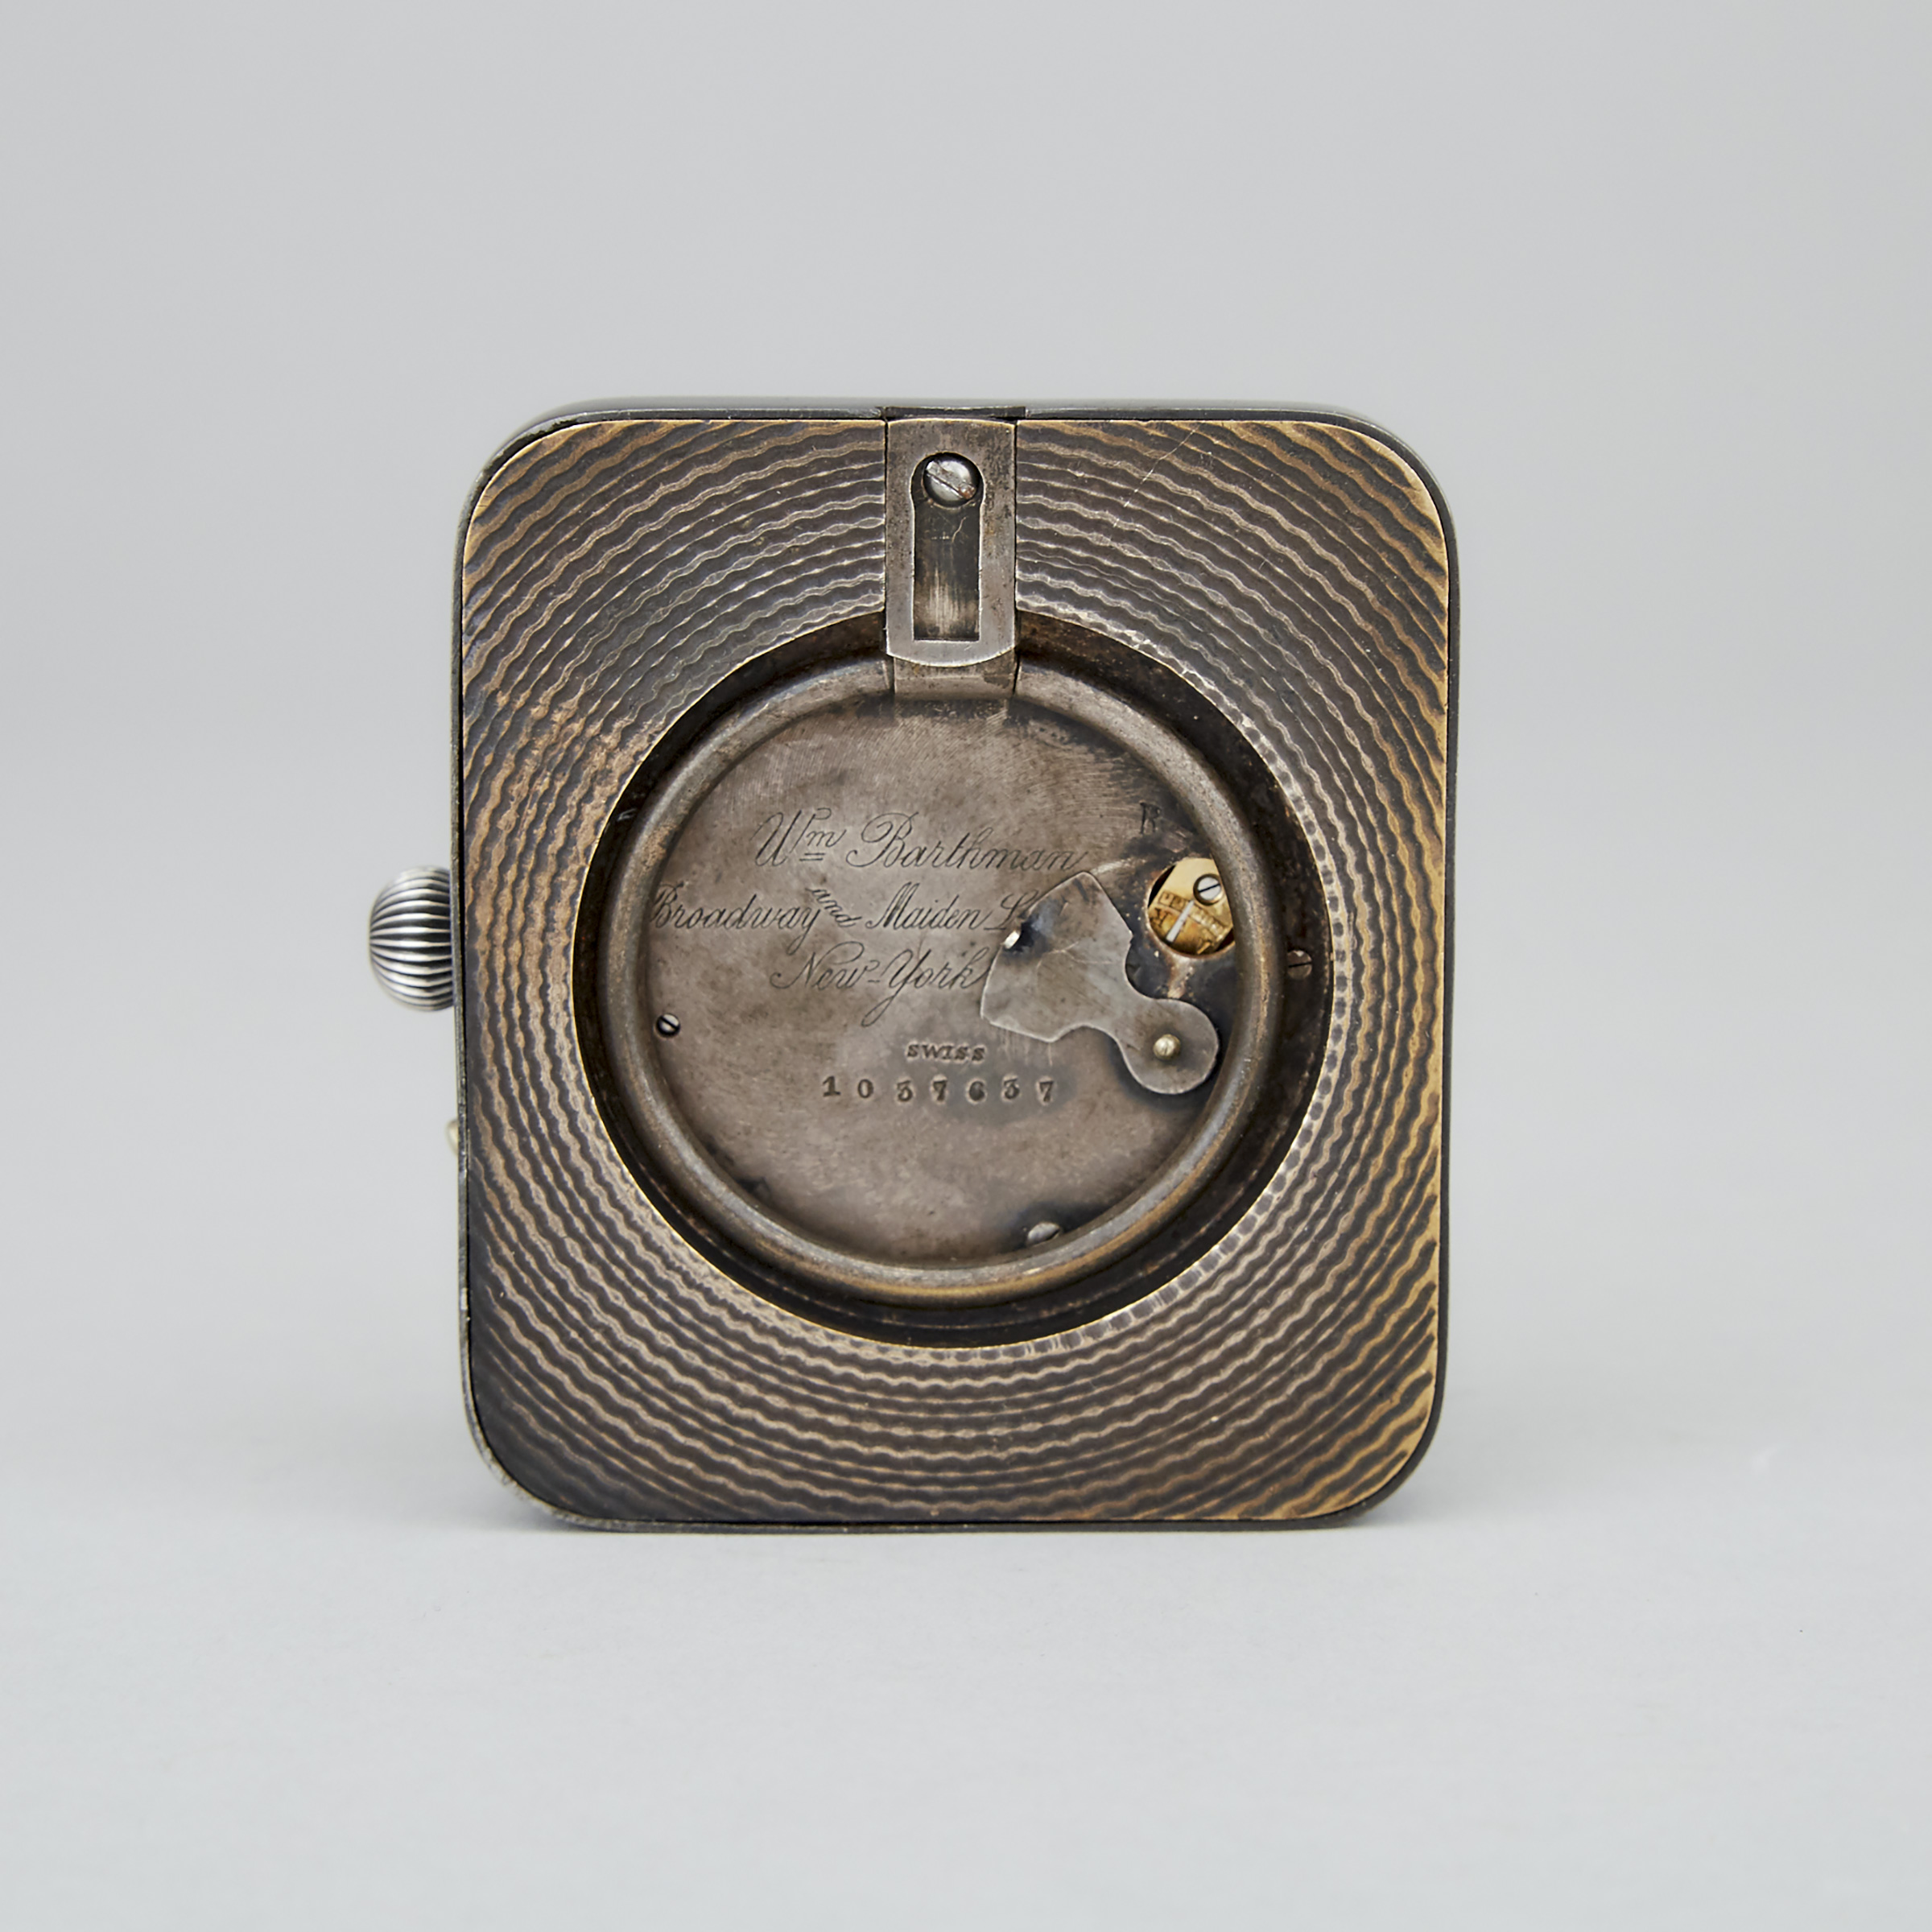 Swiss Jump Hour Desk Clock, William Barthman,  New York, c.1900 pin set; stem wind; in a gun metal case with kick-out stand